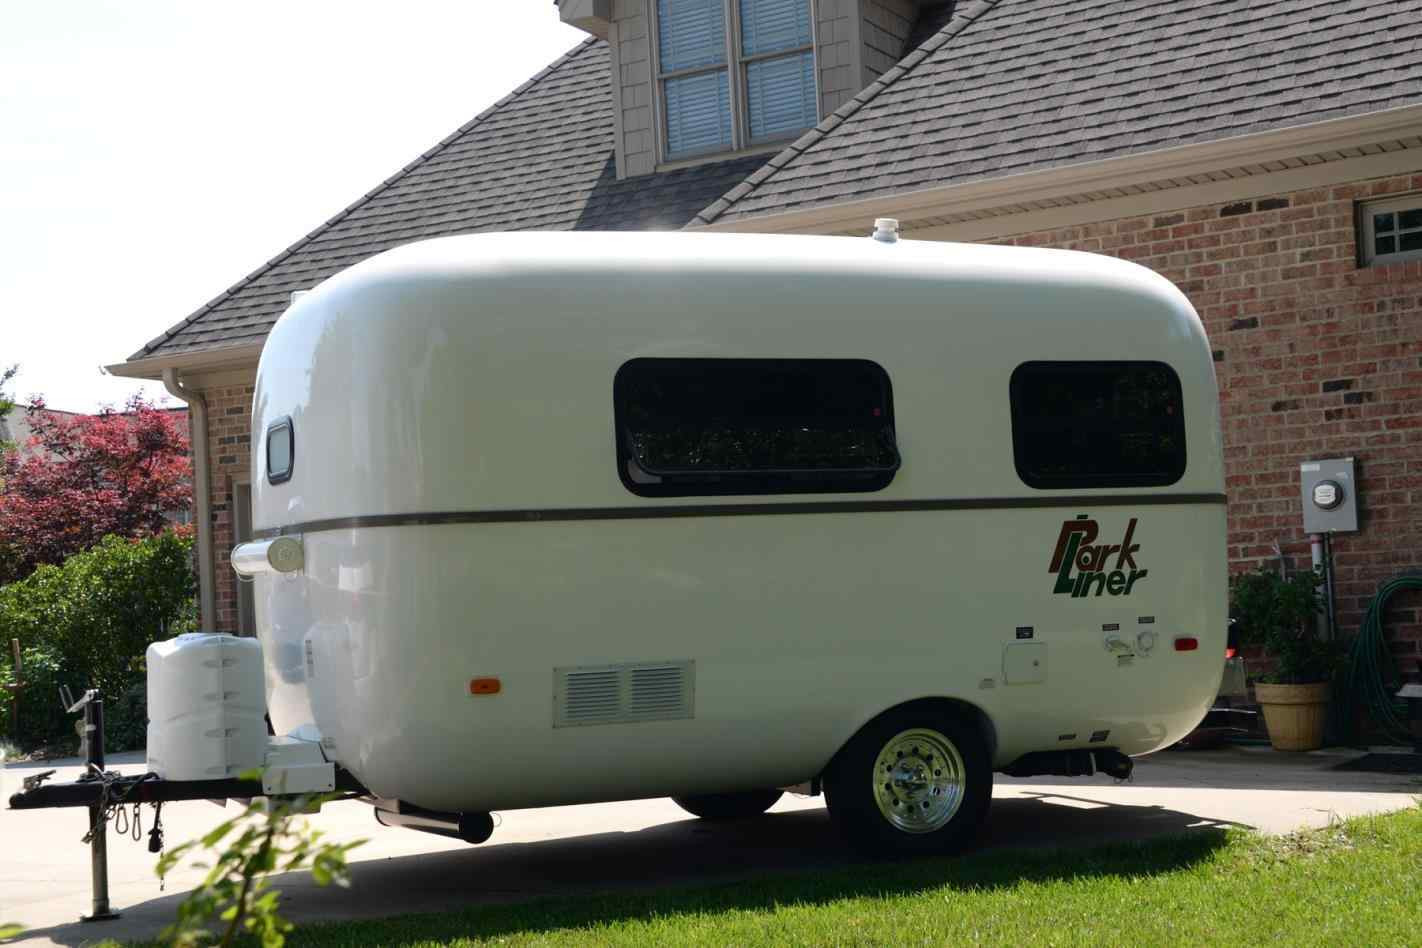 Best ideas about Small Travel Trailers With Bathroom . Save or Pin Incredible Small Travel Trailers With Bathroom For Cozy Now.